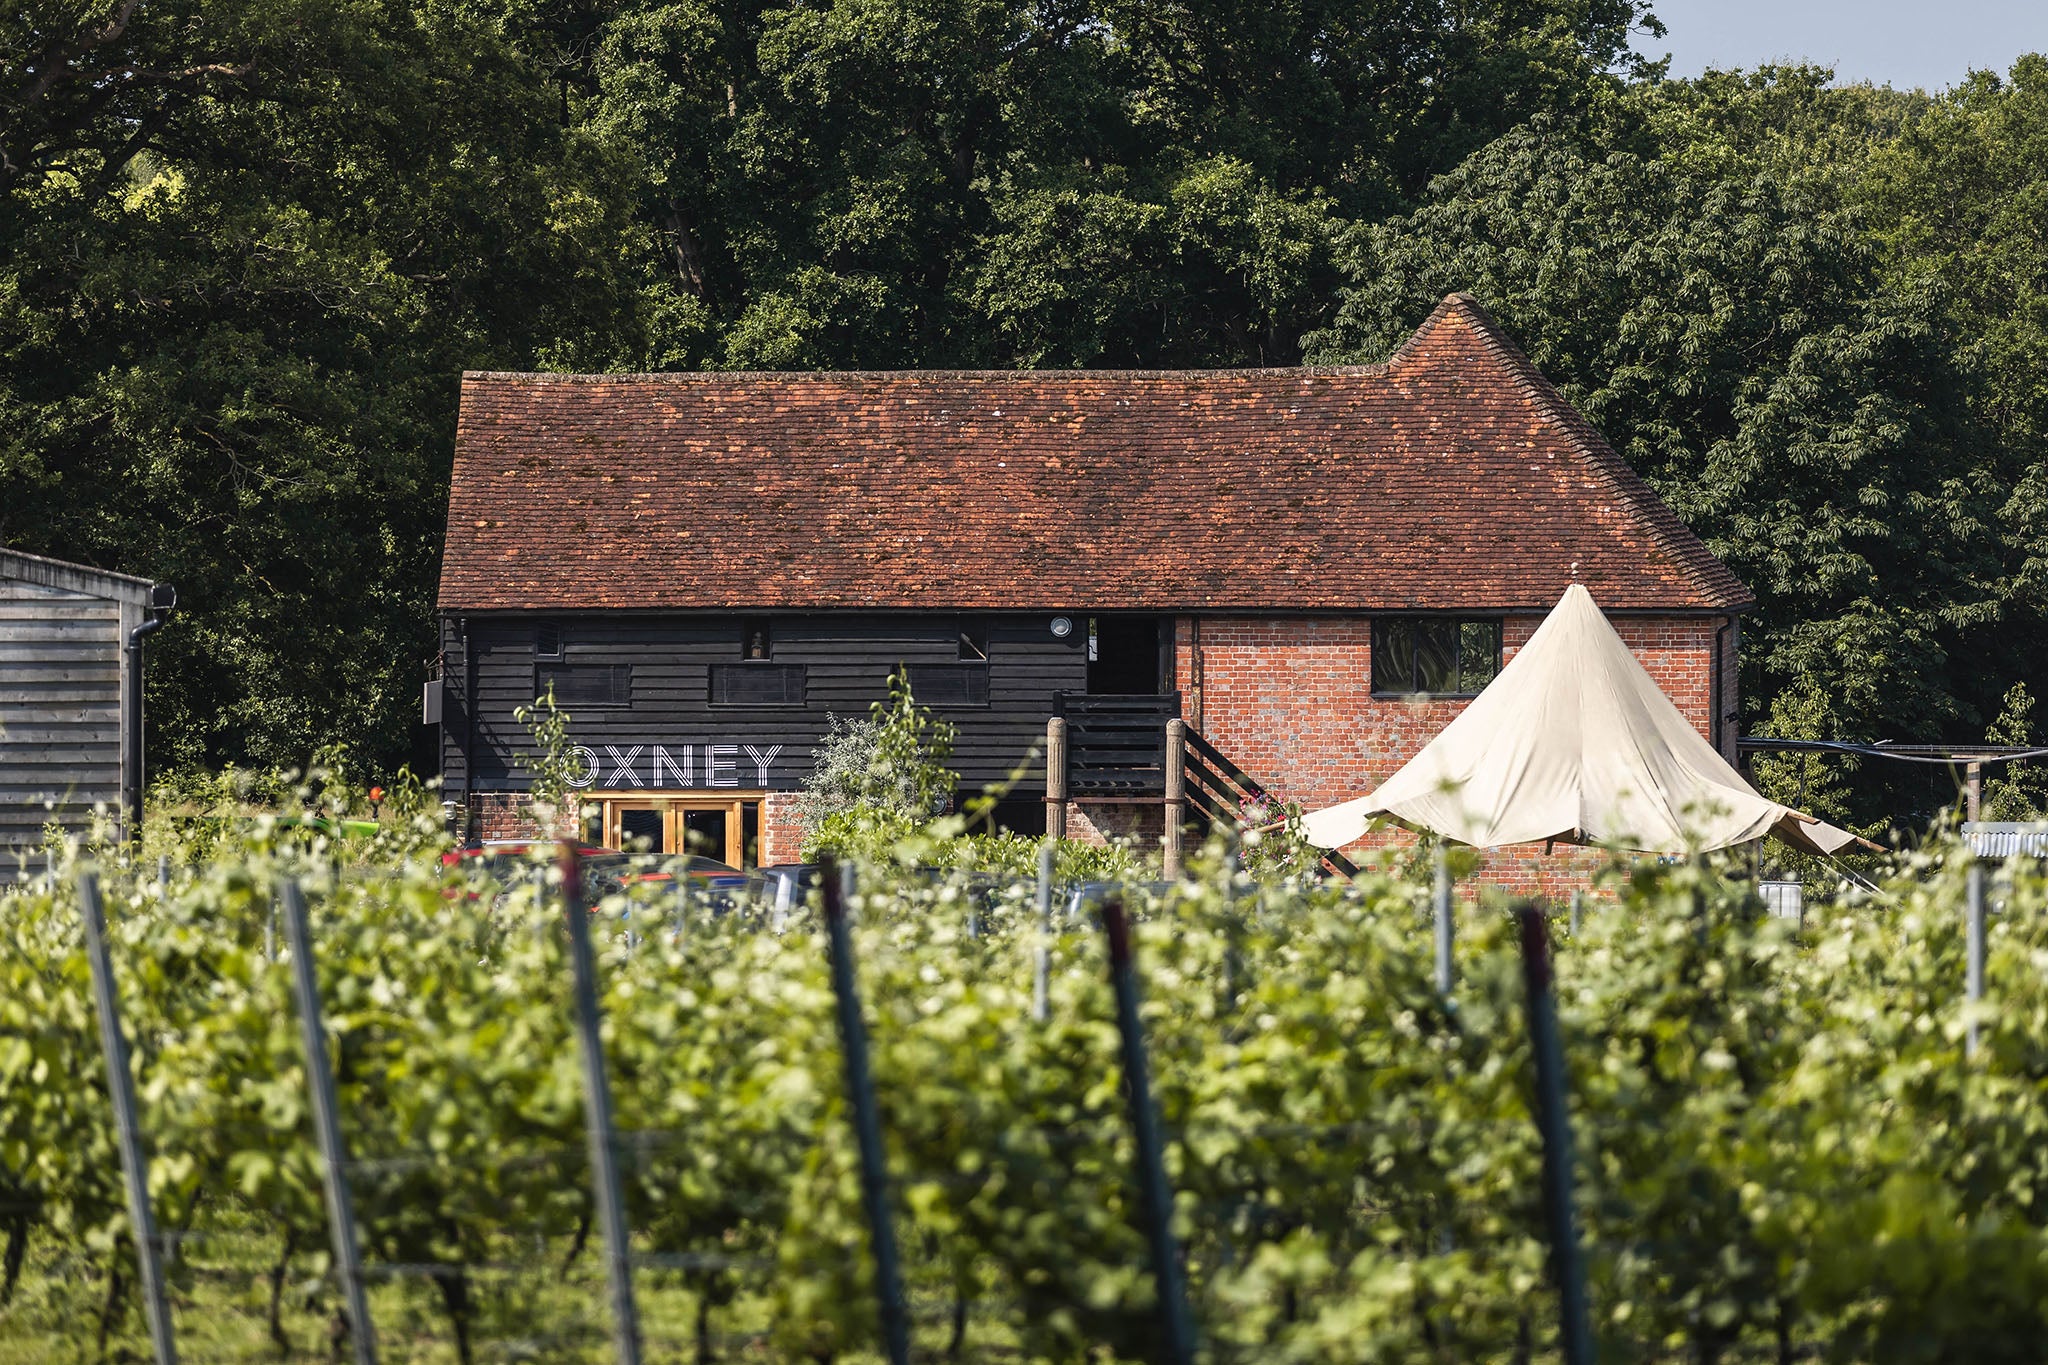 <p>Oxney is famous for making some of the best organic wines in the country </p>